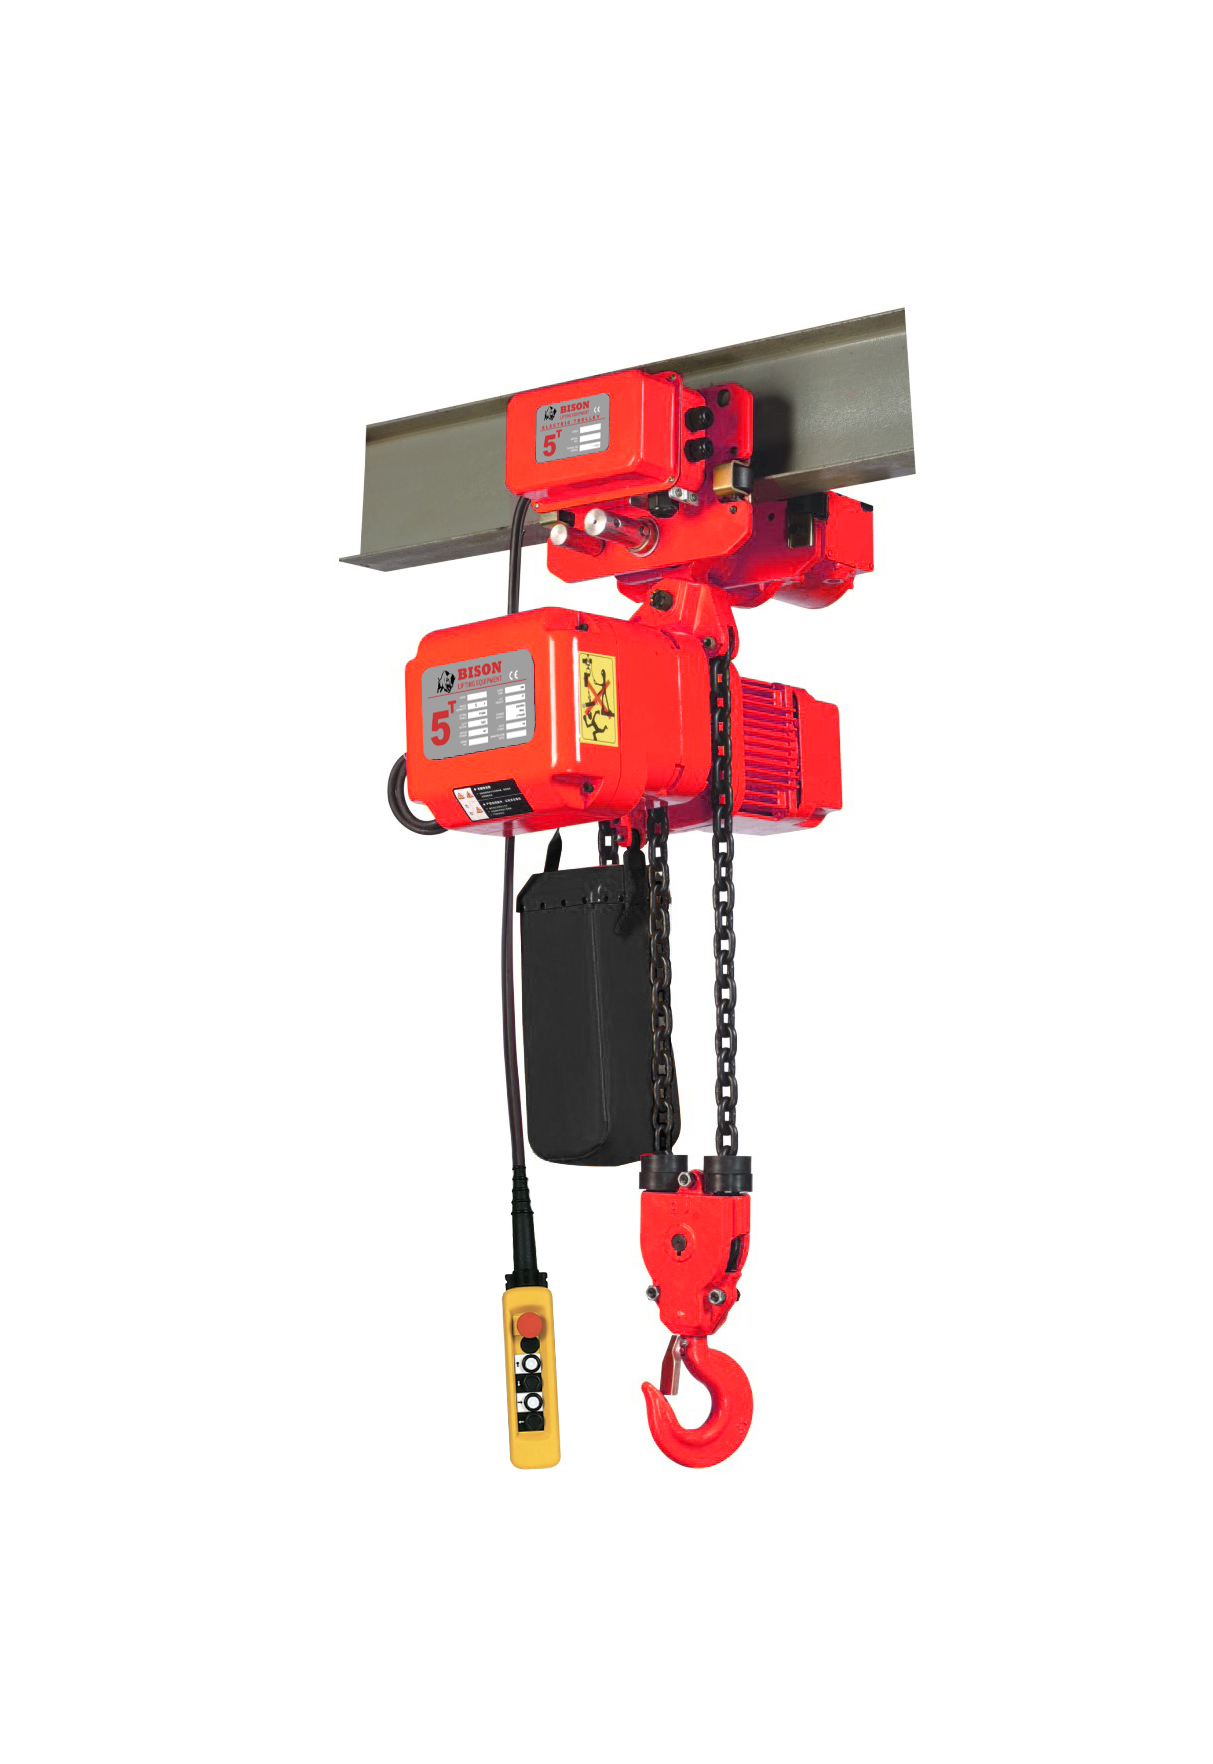 Bison Lifting HHBDSK05-02D-WPC05D 5 Ton 3 Phase Dual Speed Electric Chain Hoist with Trolley - 20ft of Lift 3-Ph 230V/460V HHBDSK05-02D-WPC05D